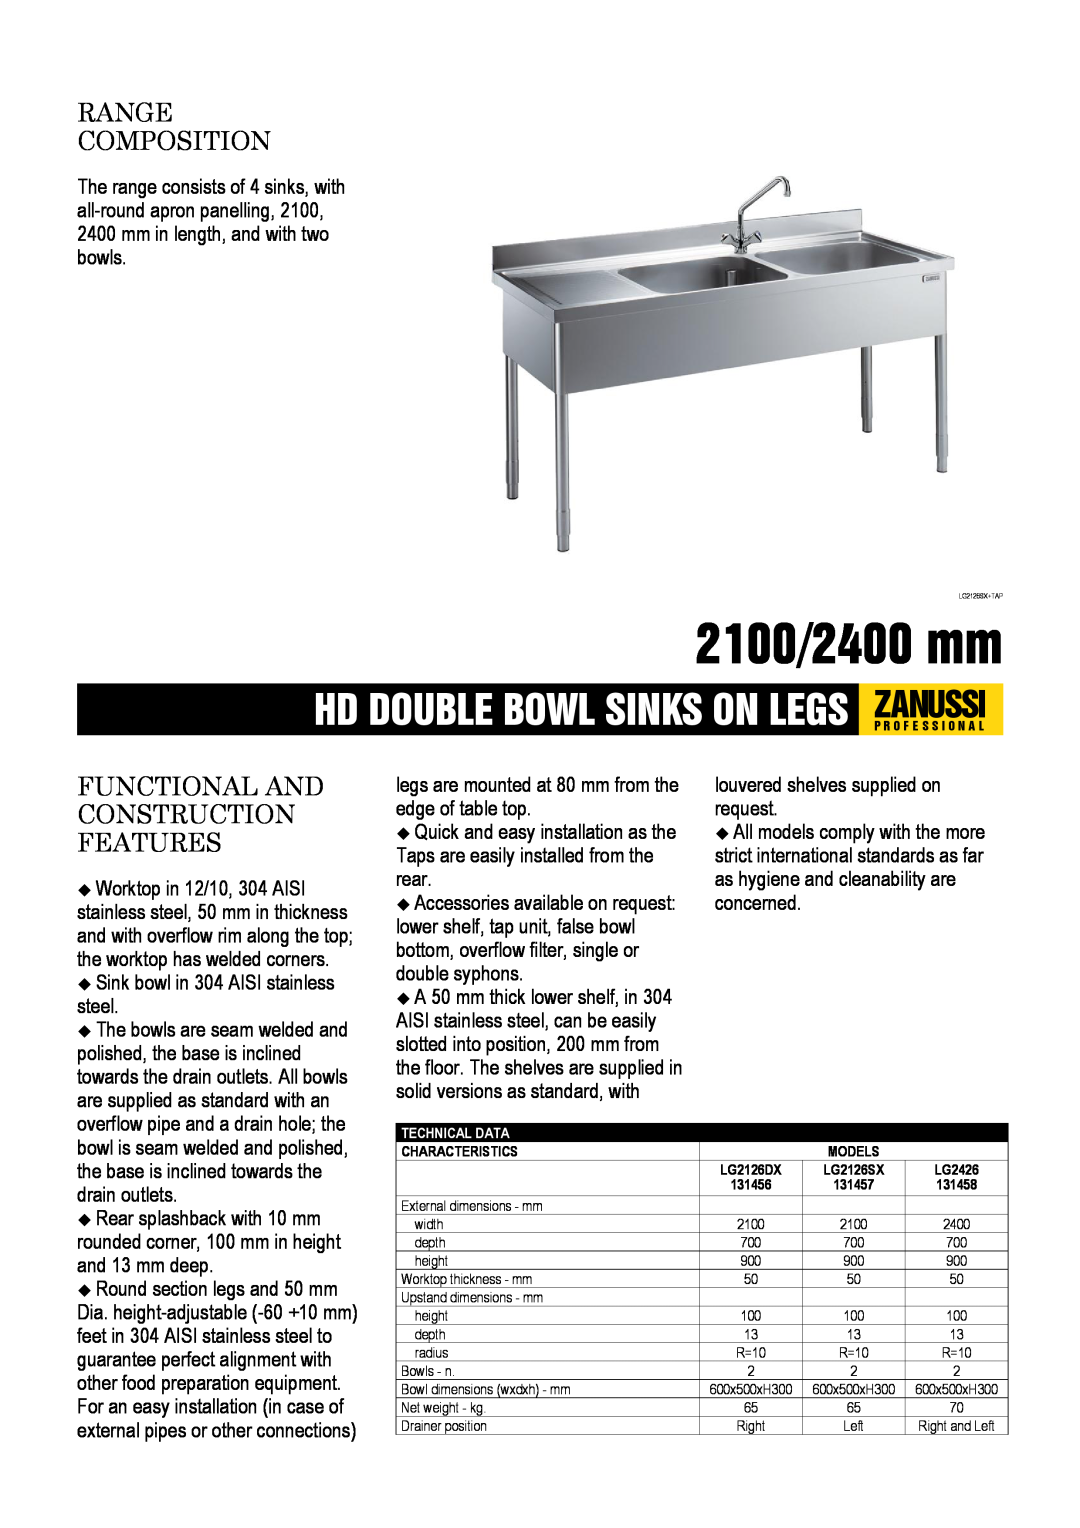 Zanussi LG2126SX, LG2426, LG2126DX, 131456 dimensions 2100/2400 mm, Range Composition, Functional And Construction Features 